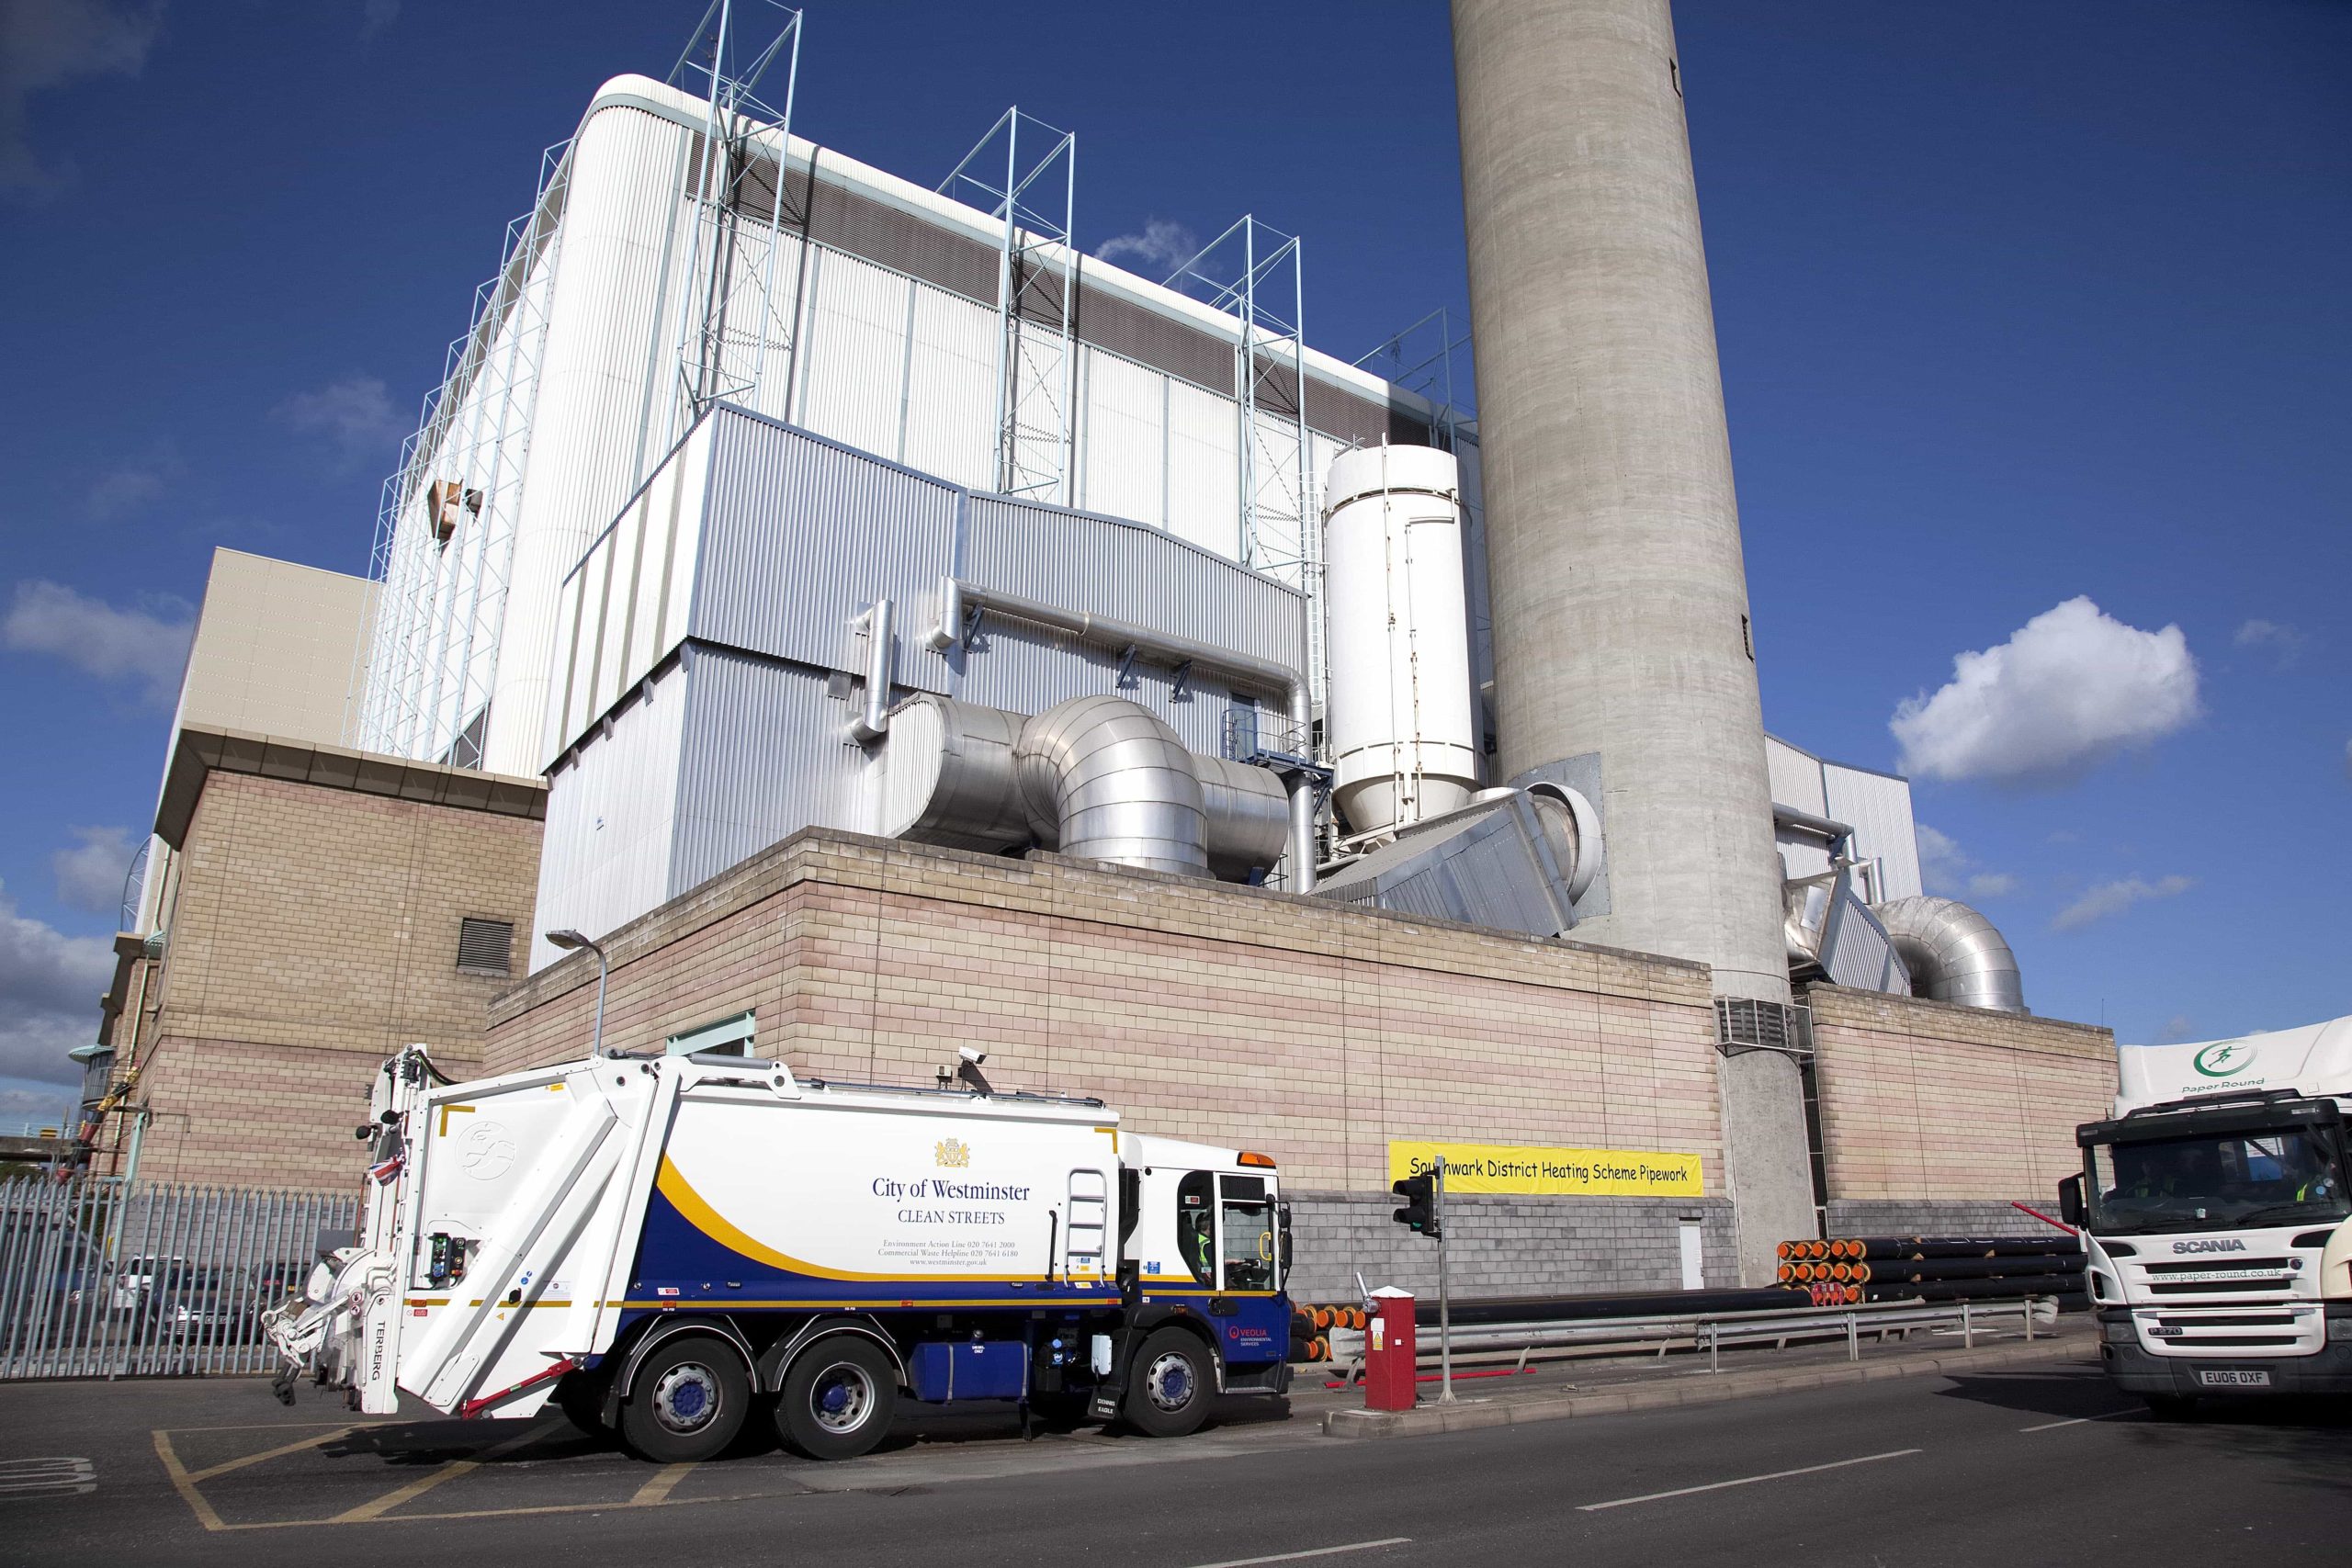 Residual waste will continue to be sent to the SELCHP energy from waste plant in south London